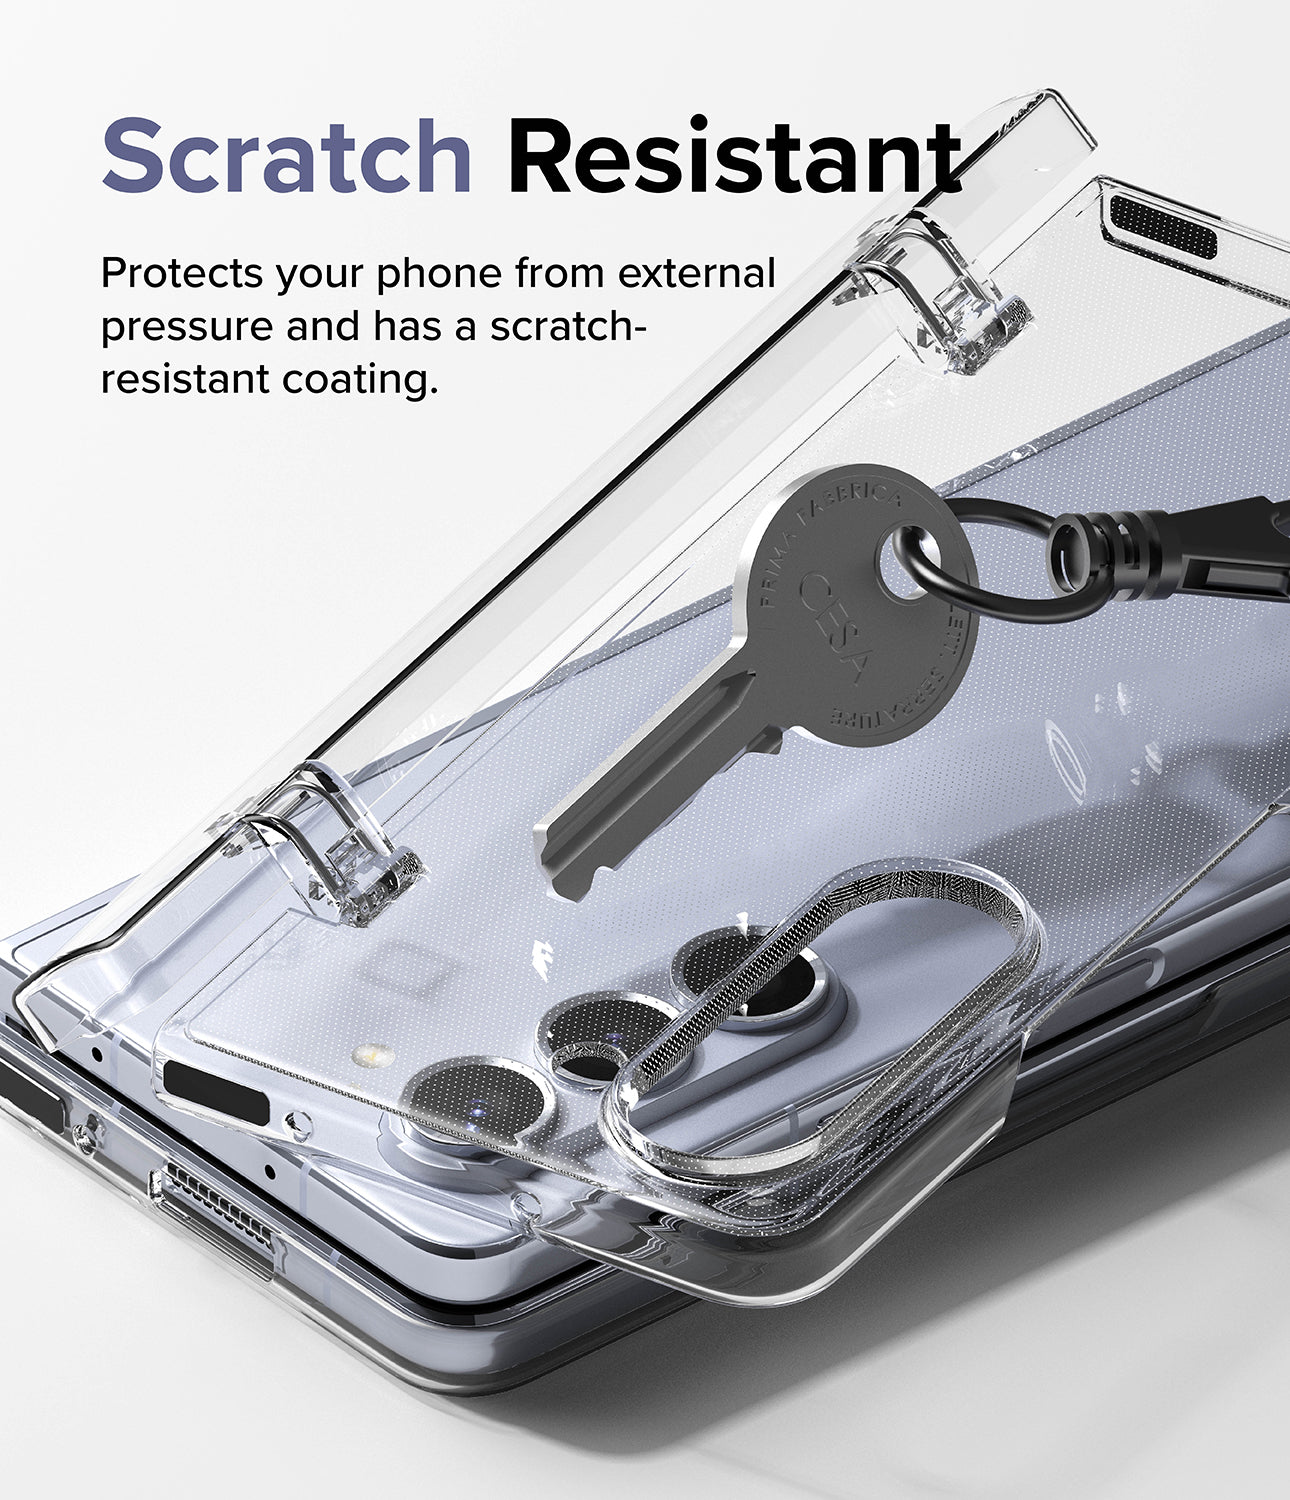 Galaxy Z Fold 5 Case | Slim Hinge - Scratch Resistant. Protects your phone from external pressure and has a scratch-resistant coating.